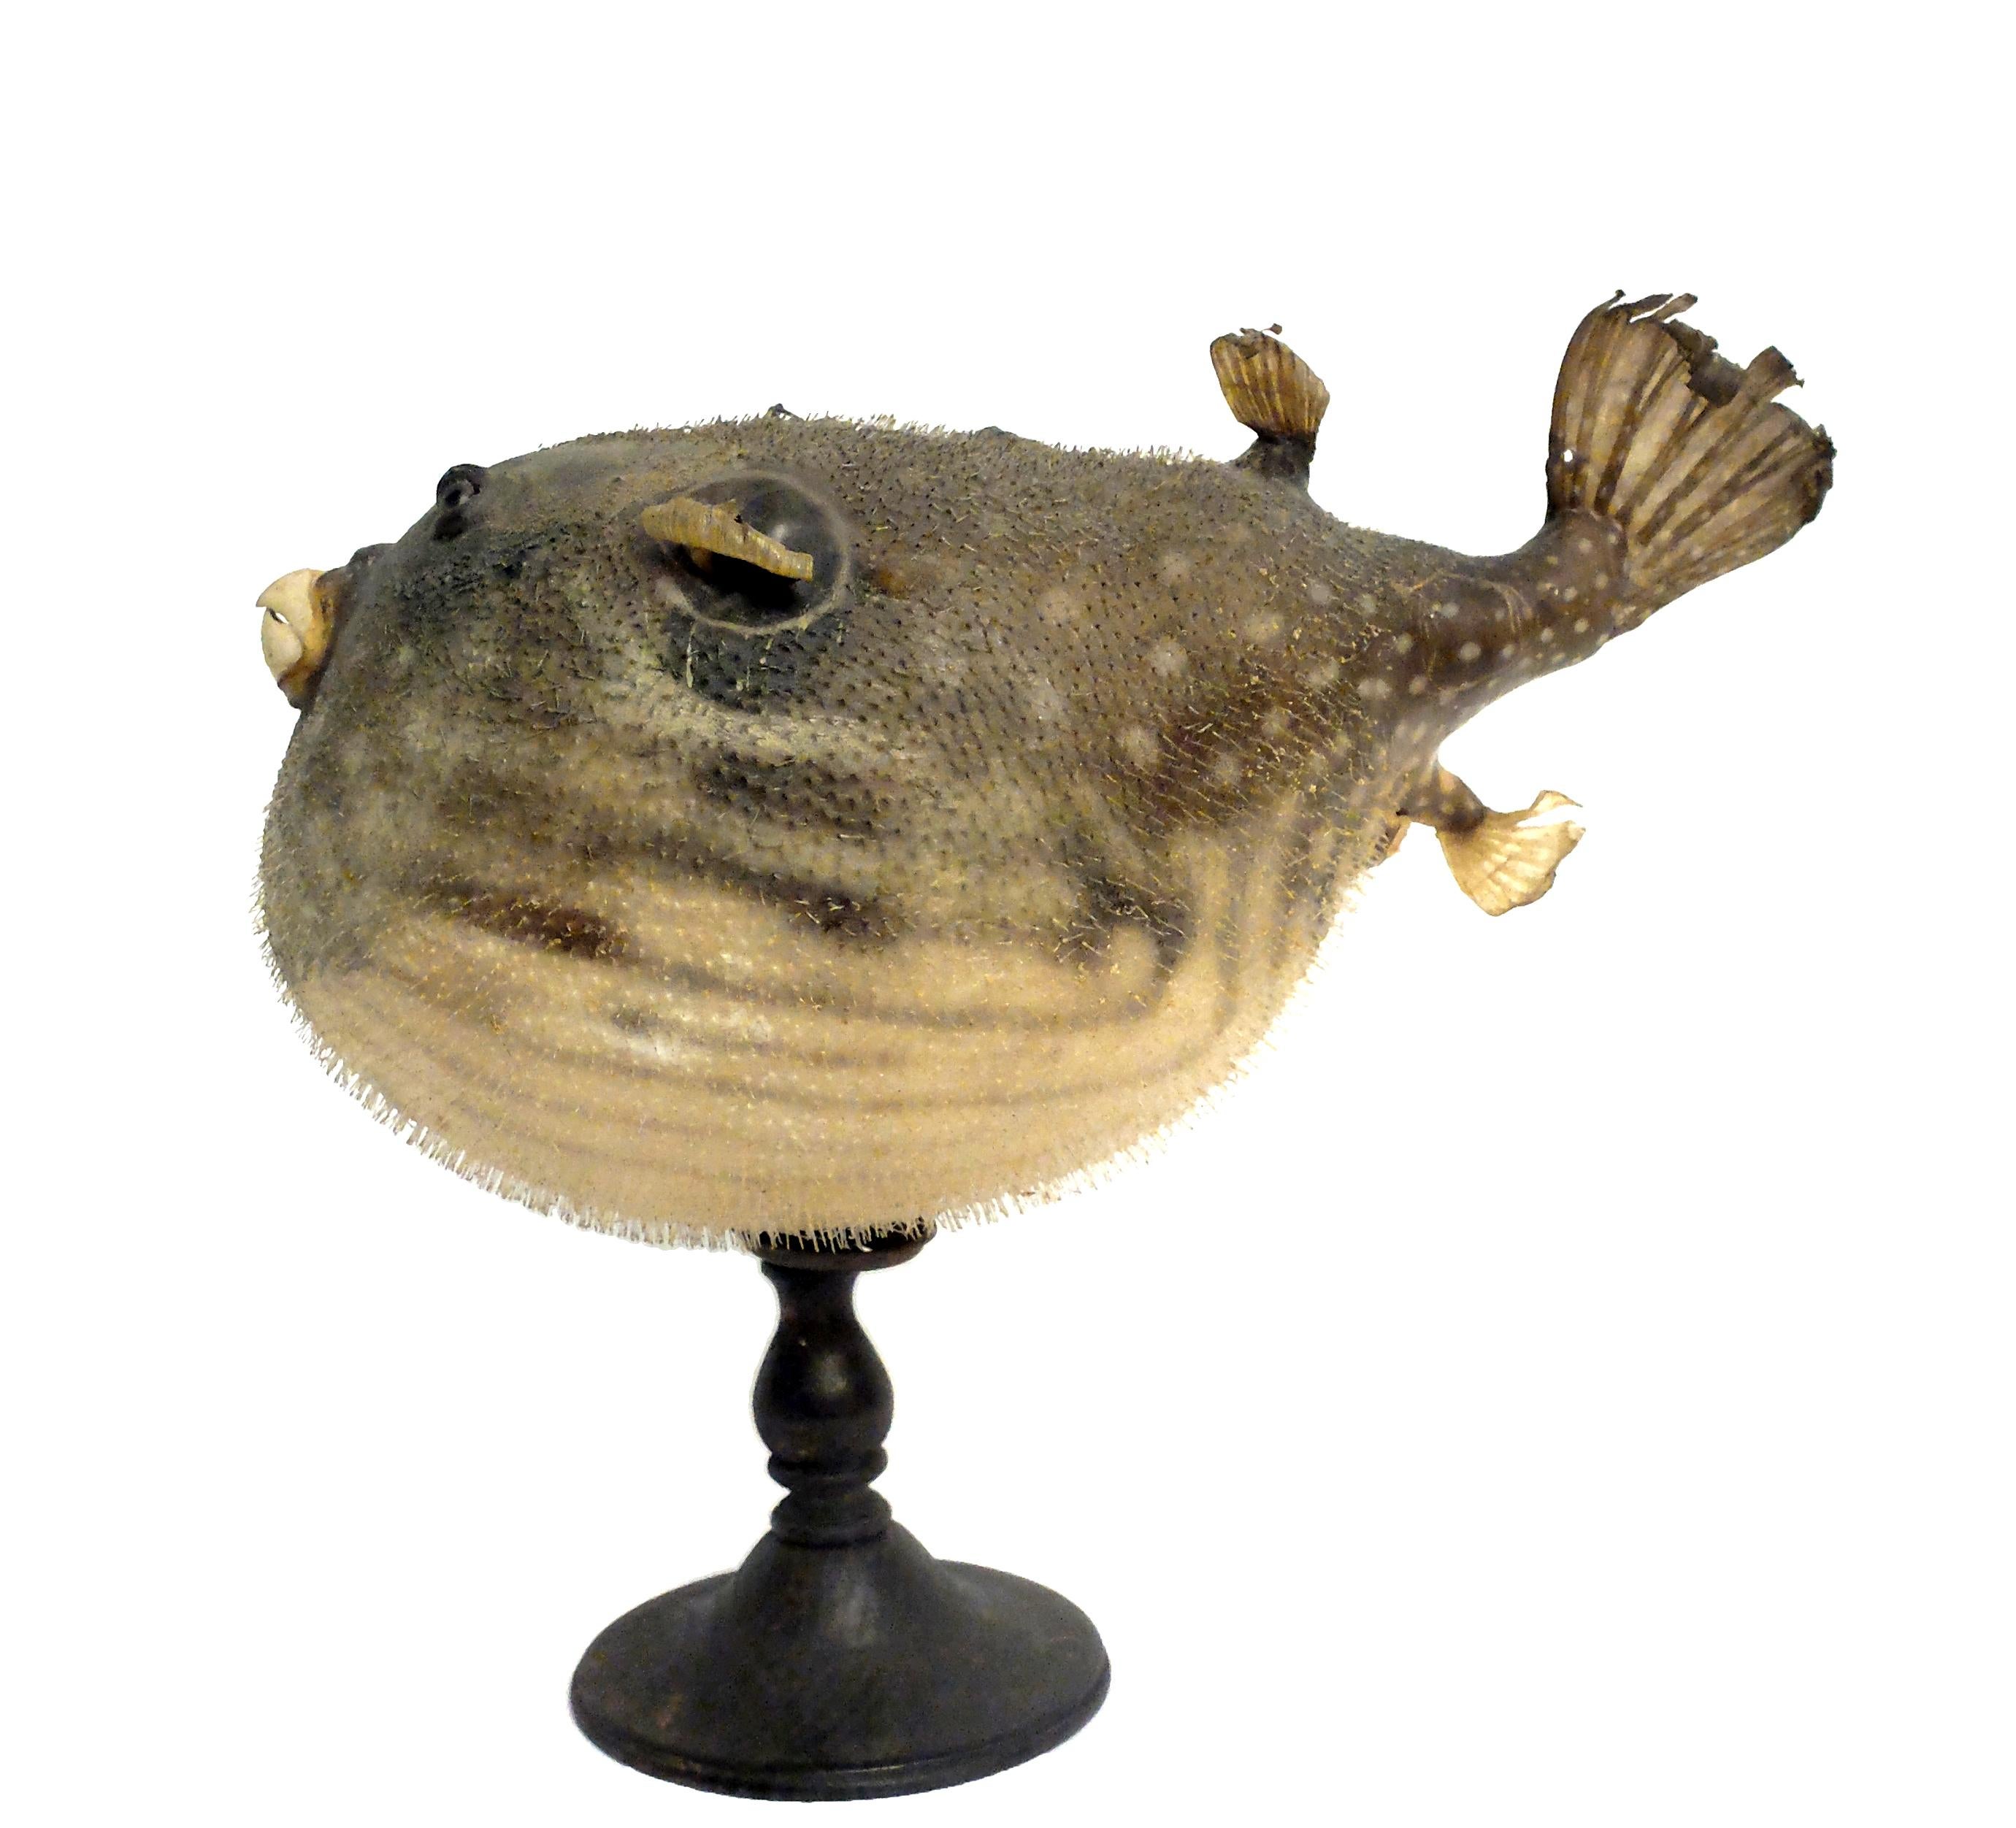 A 19th century Wunderkammer rare marine natural taxidermy Specimen of the common Puffer fish (Diodon) with a sulphur glass eyes. The Specimen is stuffed and mounted over a laquered wooden base, black color.